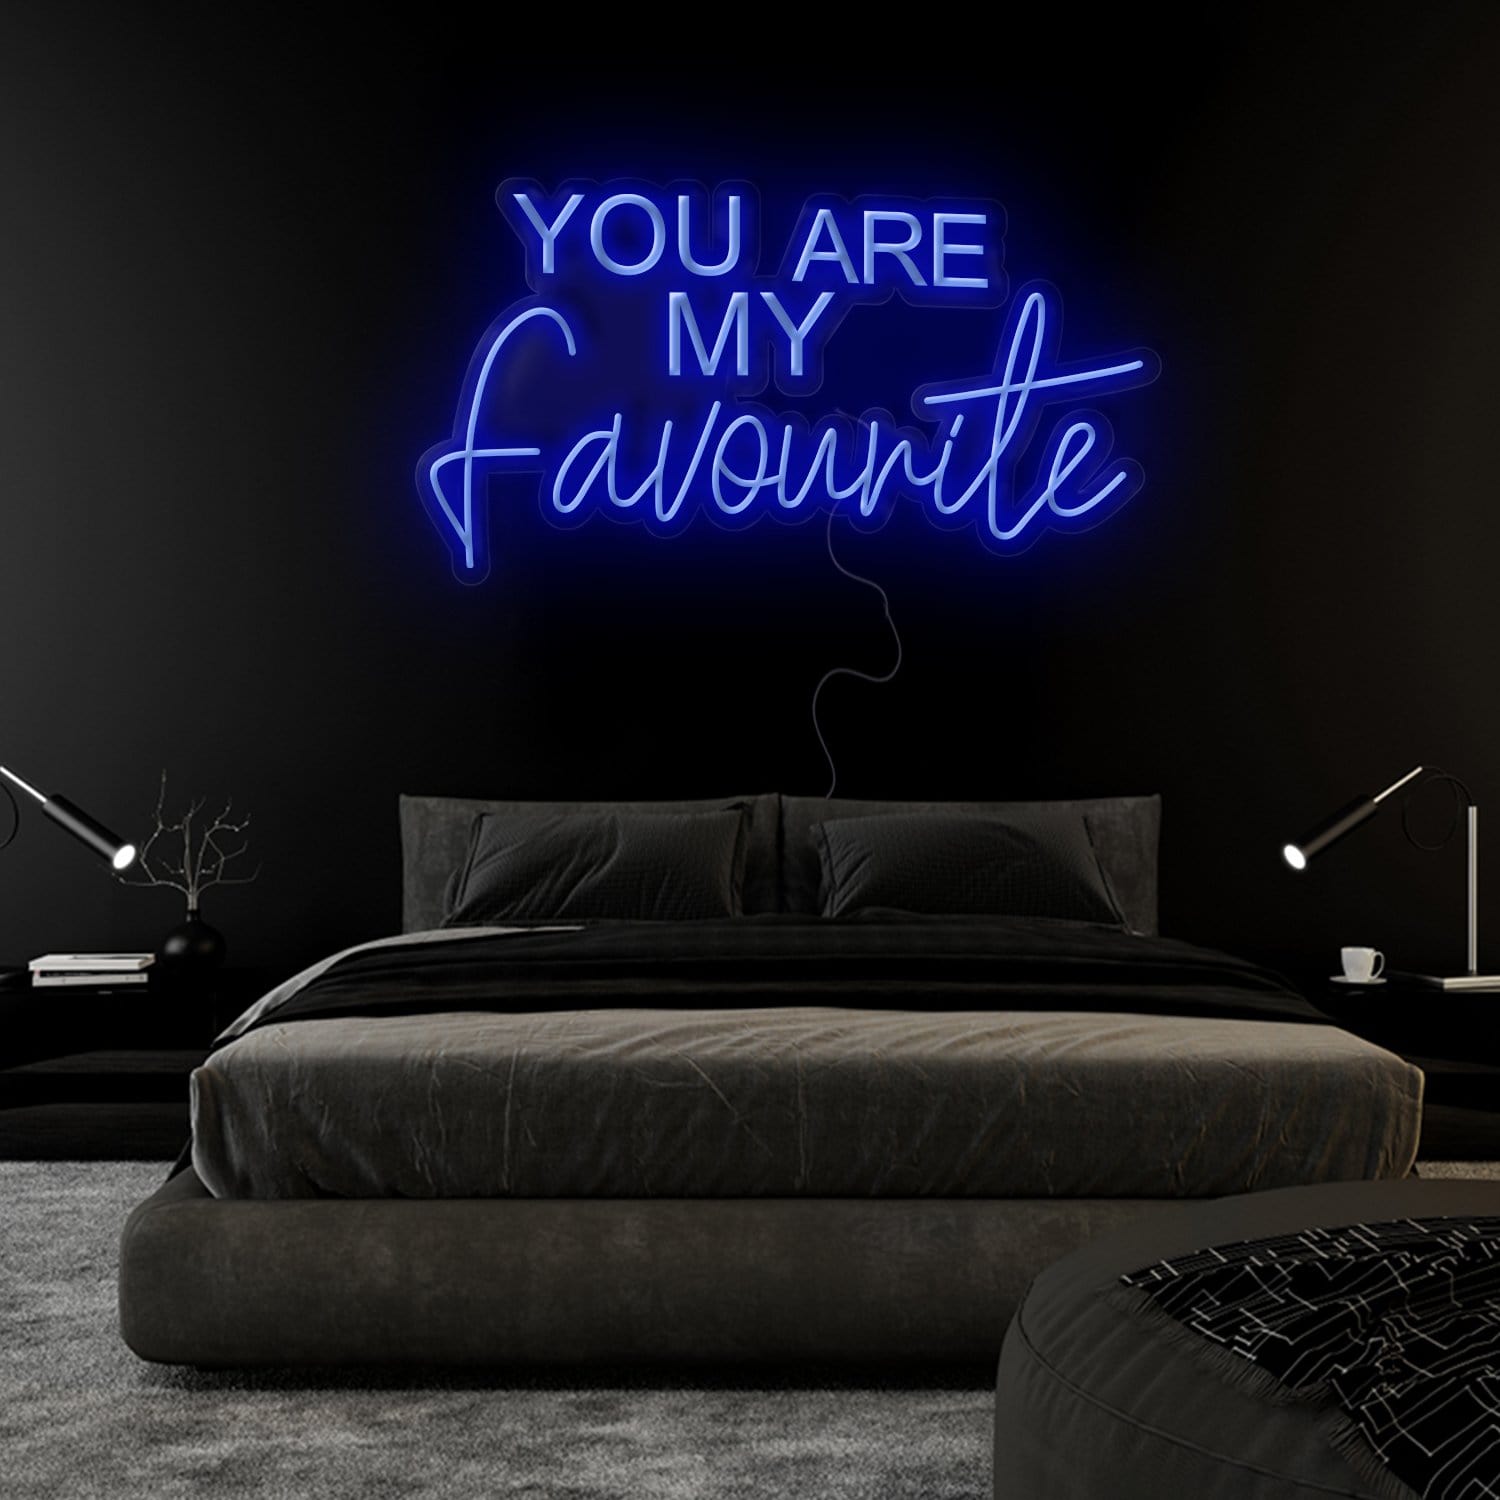 "You Are My Favourite" LED Neonschild Sign Schriftzug - NEONEVERGLOW